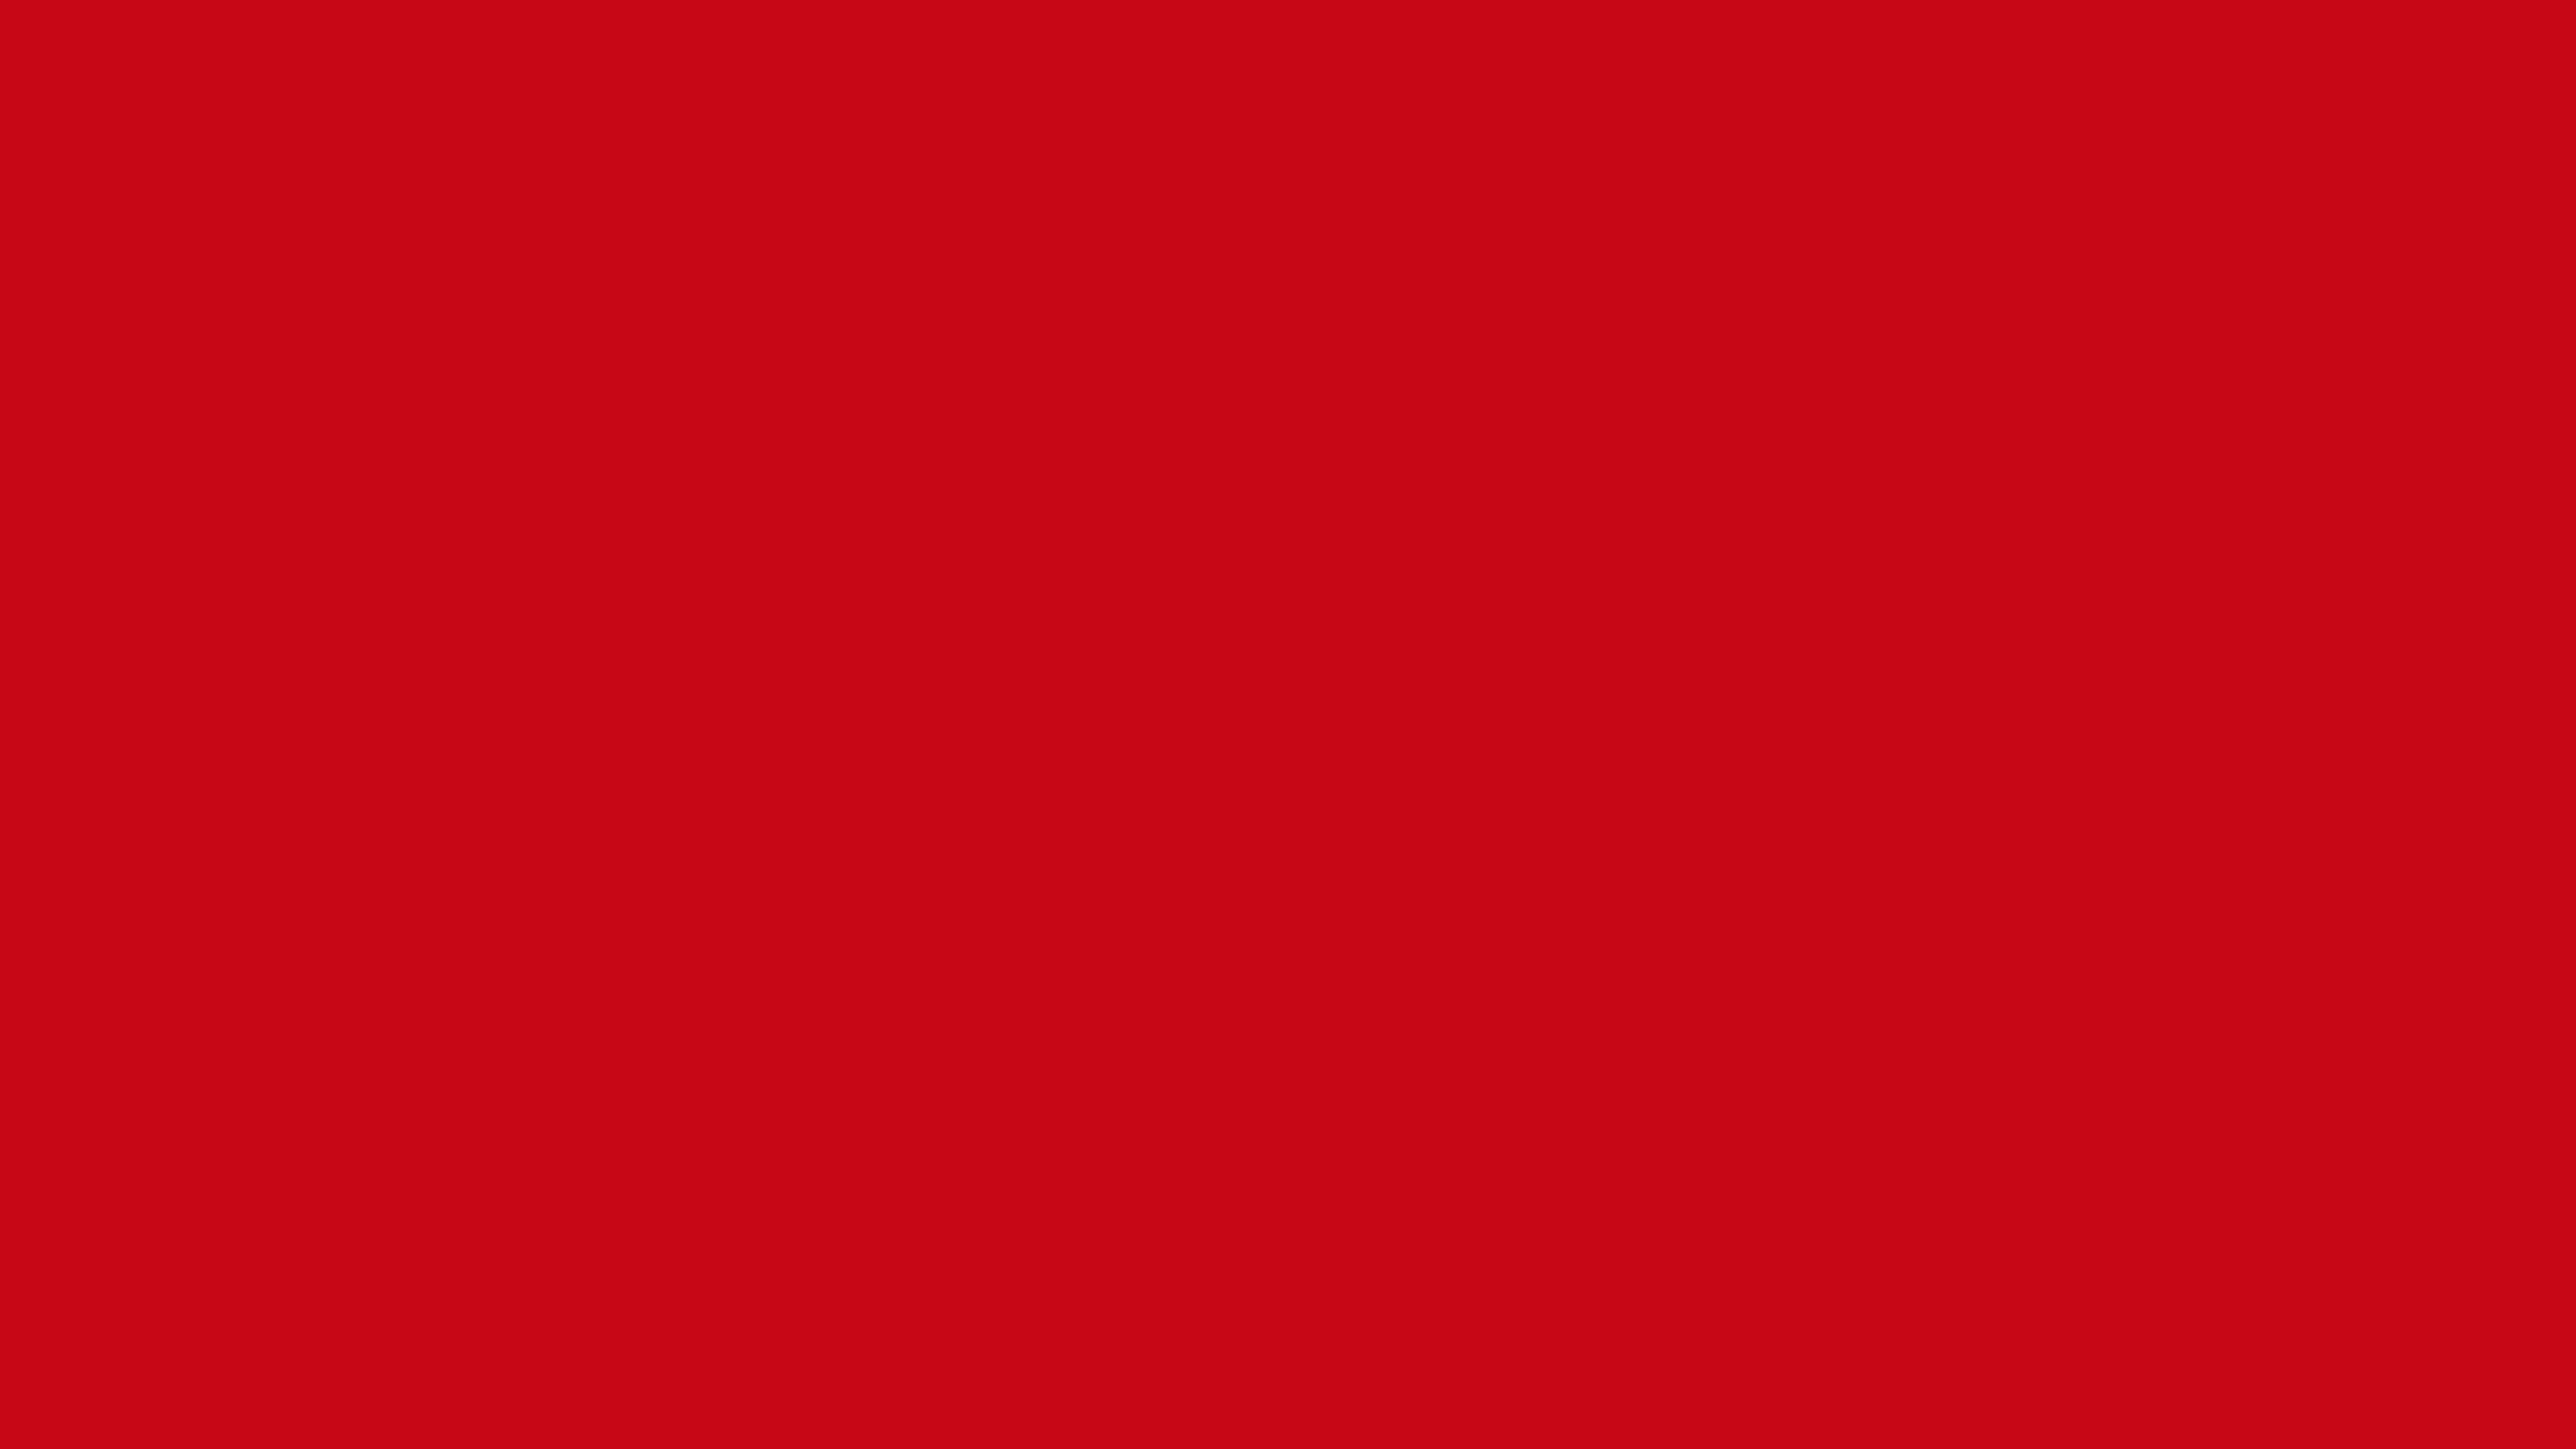 7680x4320 Venetian Red Solid Color Background